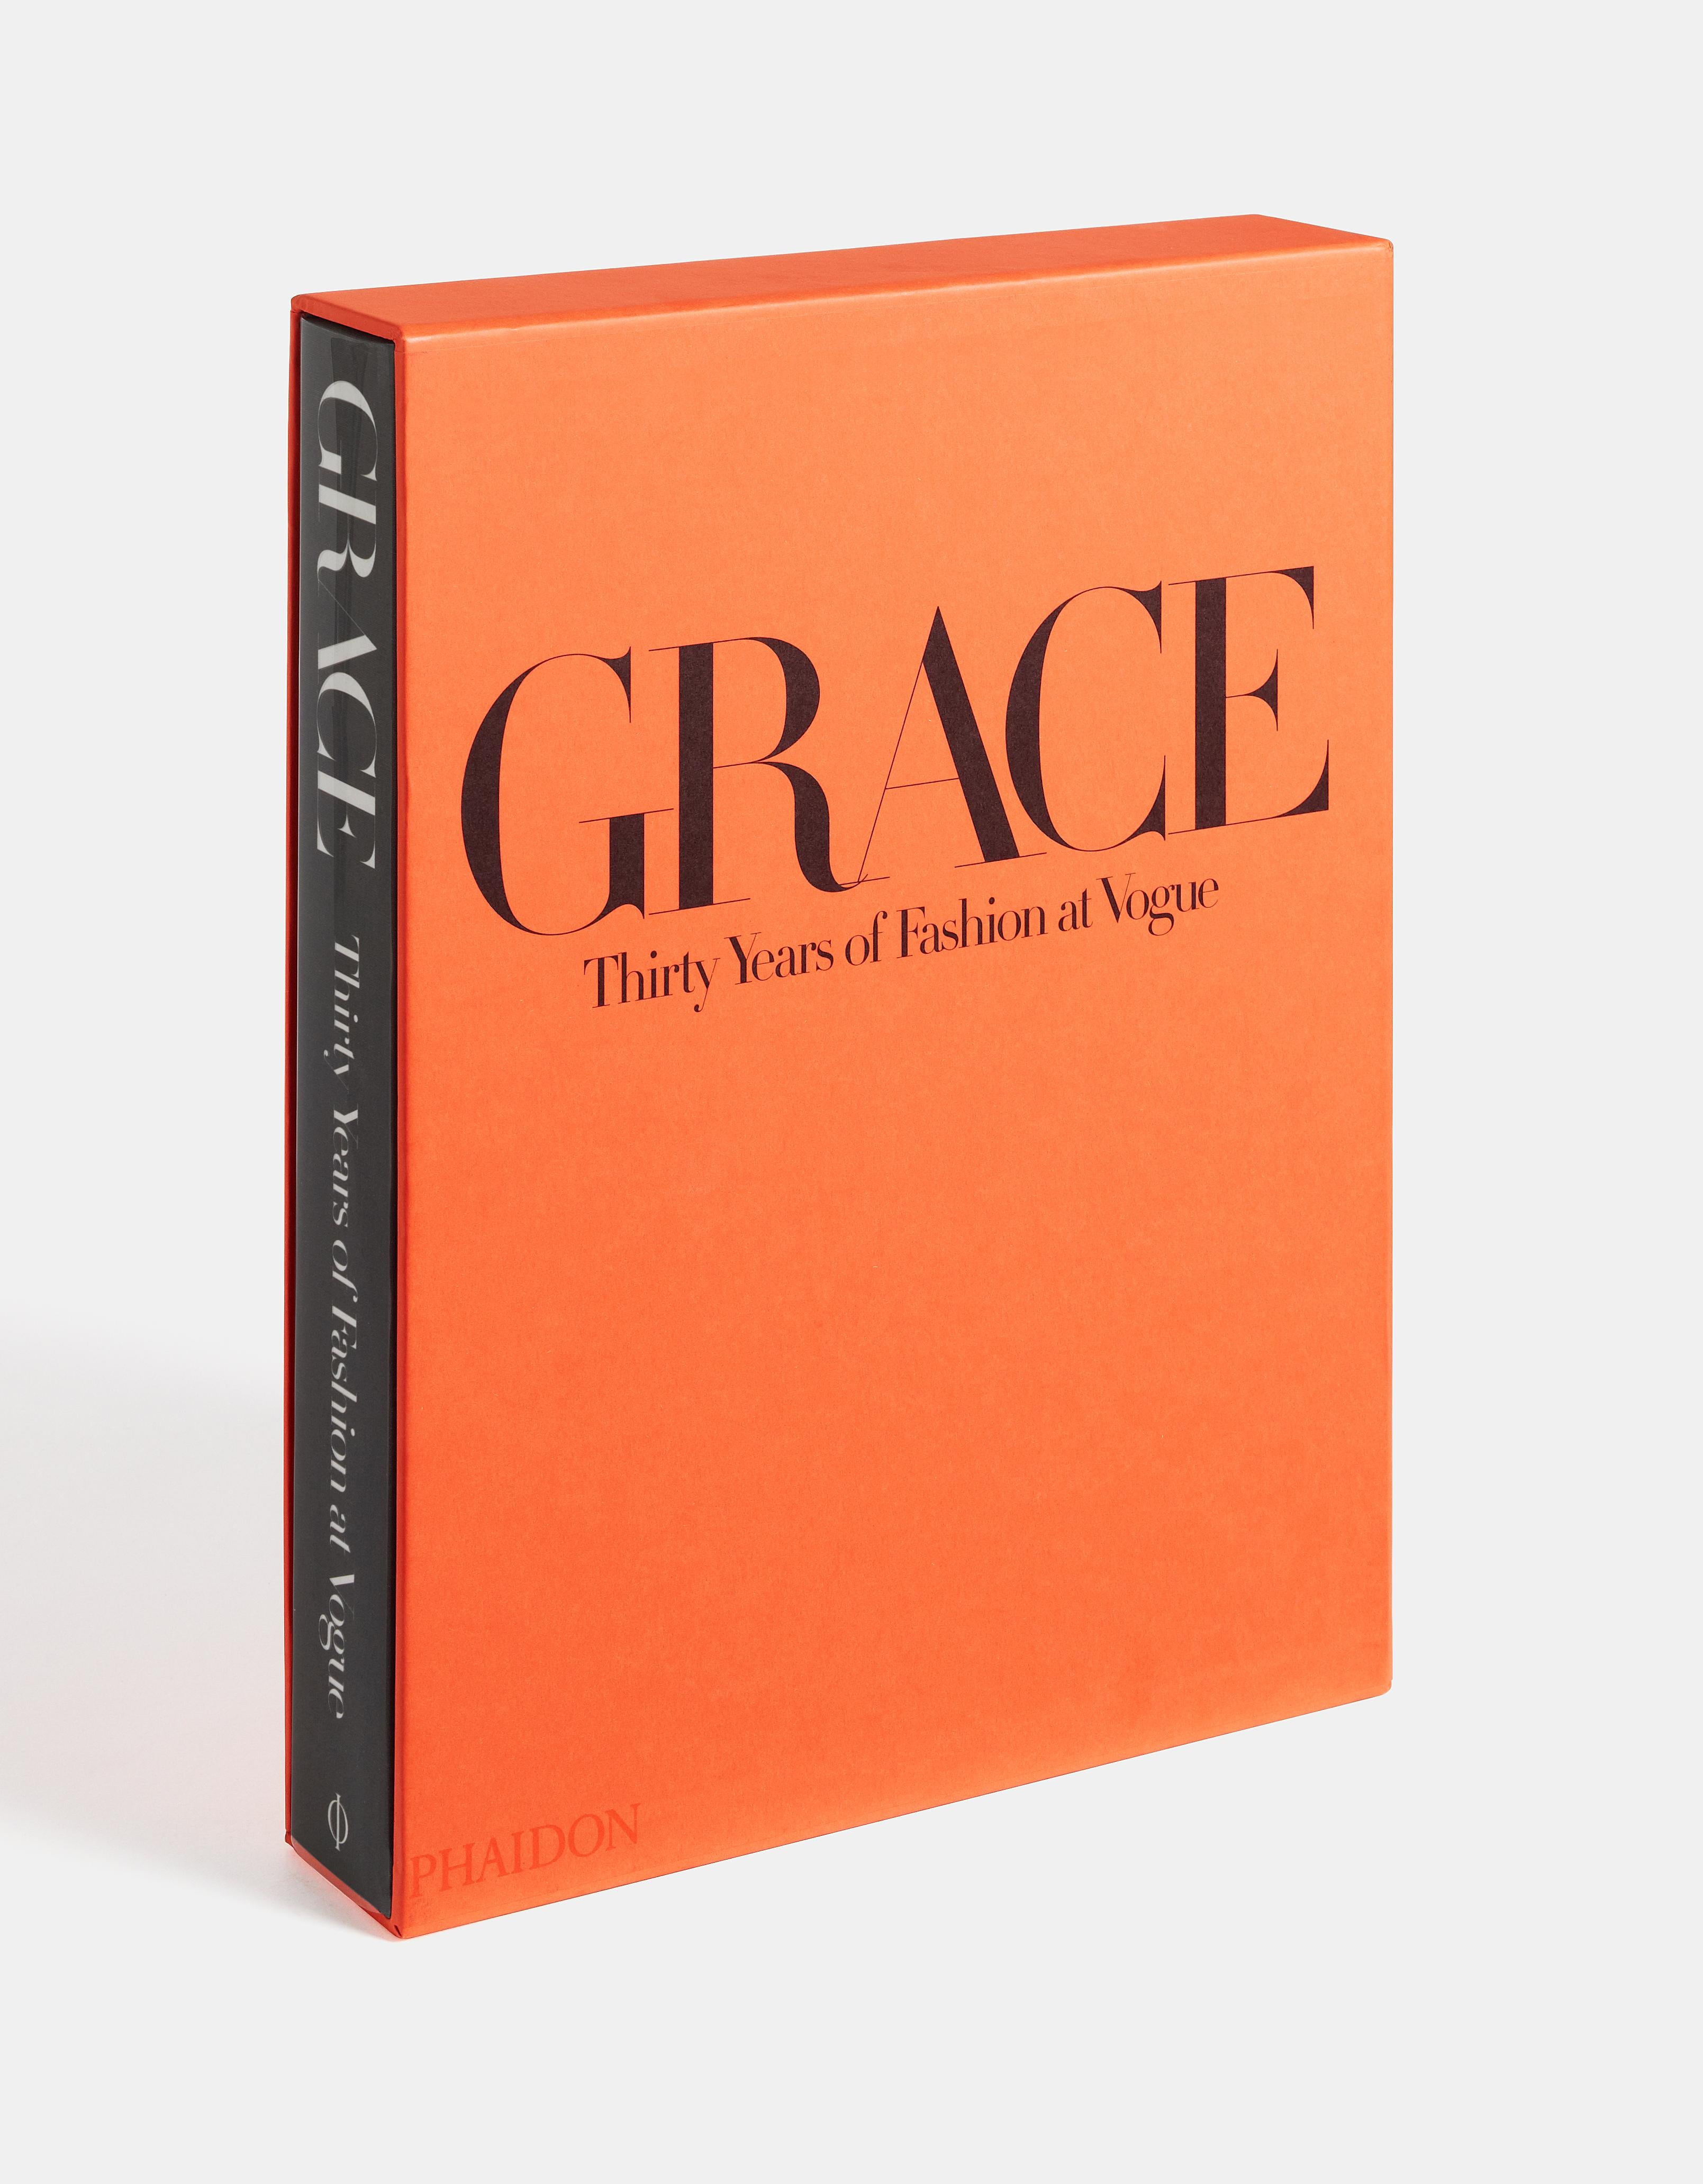 A celebration of the work of legendary fashion stylist Grace Coddington during her first 30 years at Vogue UK and US.

First published in 2002, the reissue of this 408-page monograph of work by the legendary fashion stylist Grace Coddington is also